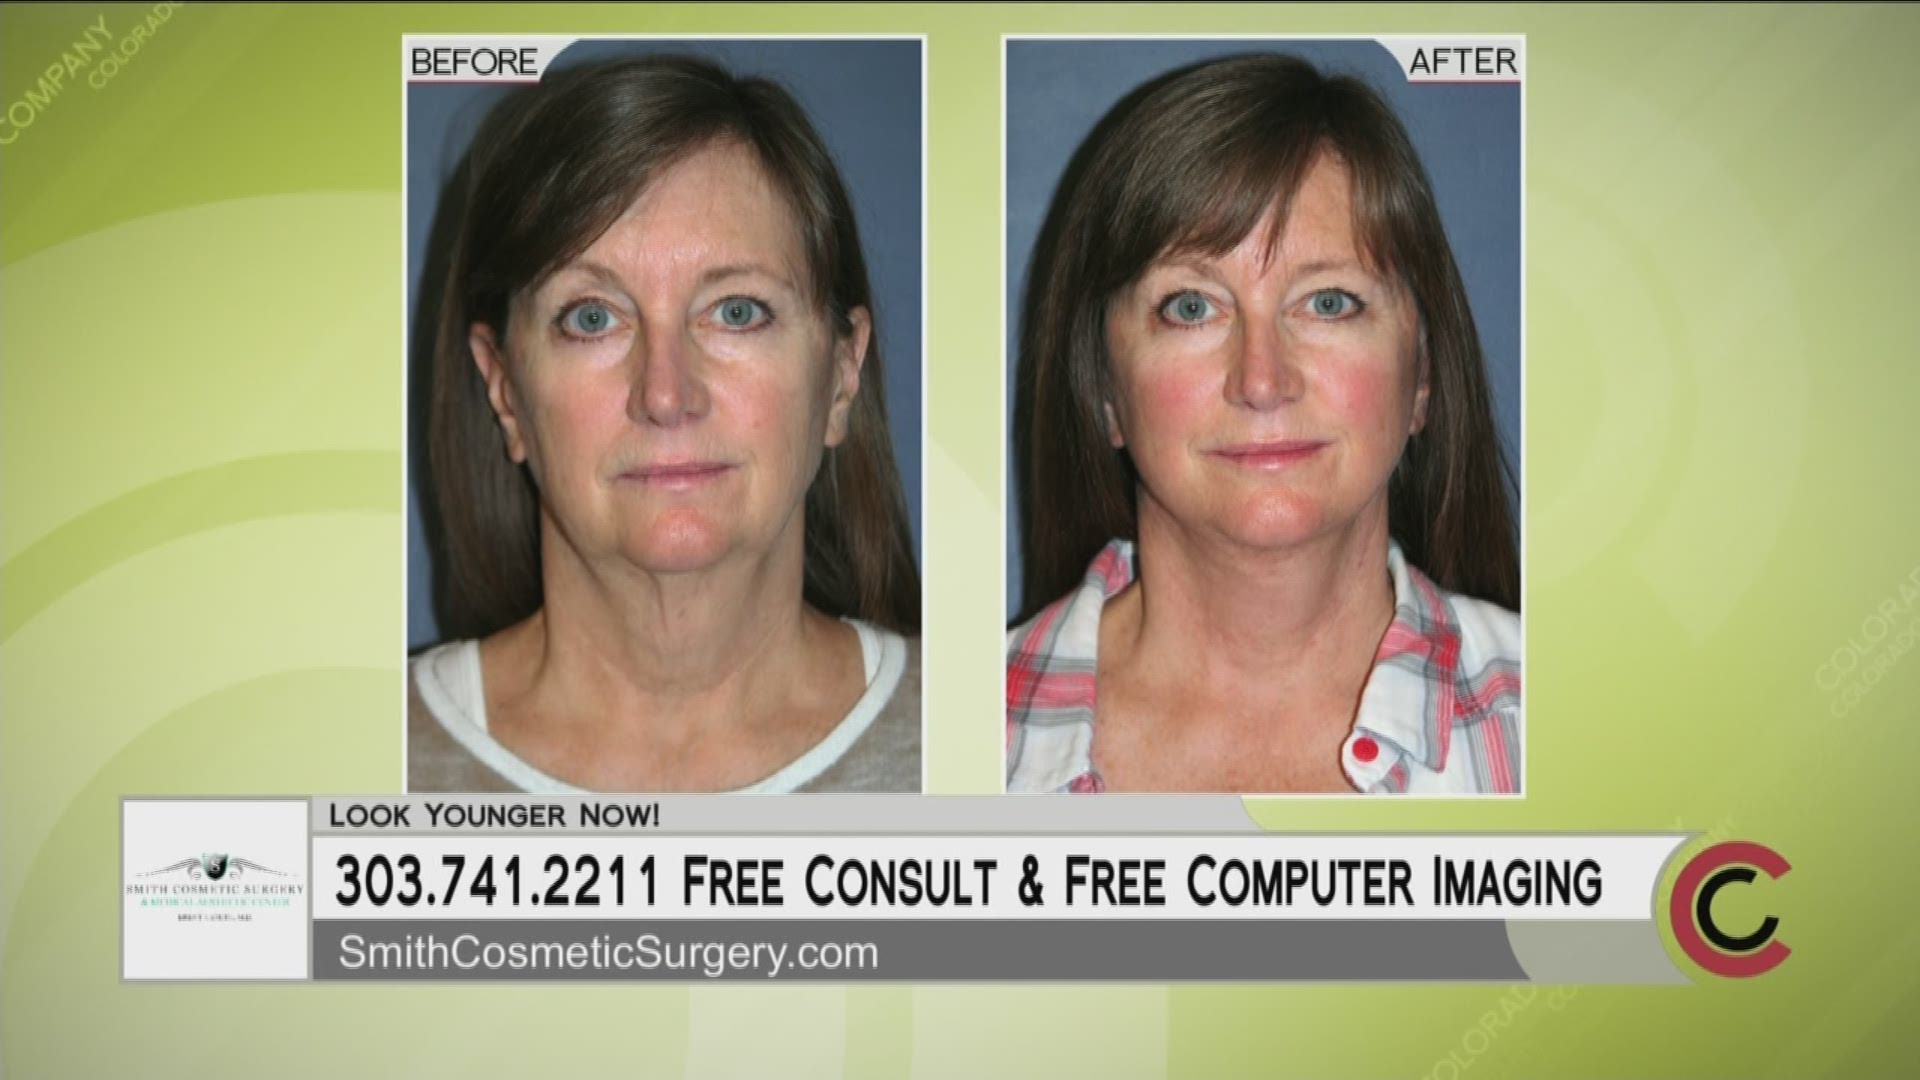 On your first visit to Smith Cosmetic Surgery, you'll get free computer imaging of your potential results. Learn more at 303.741.2211 or SmithCosmeticSurgery.com.